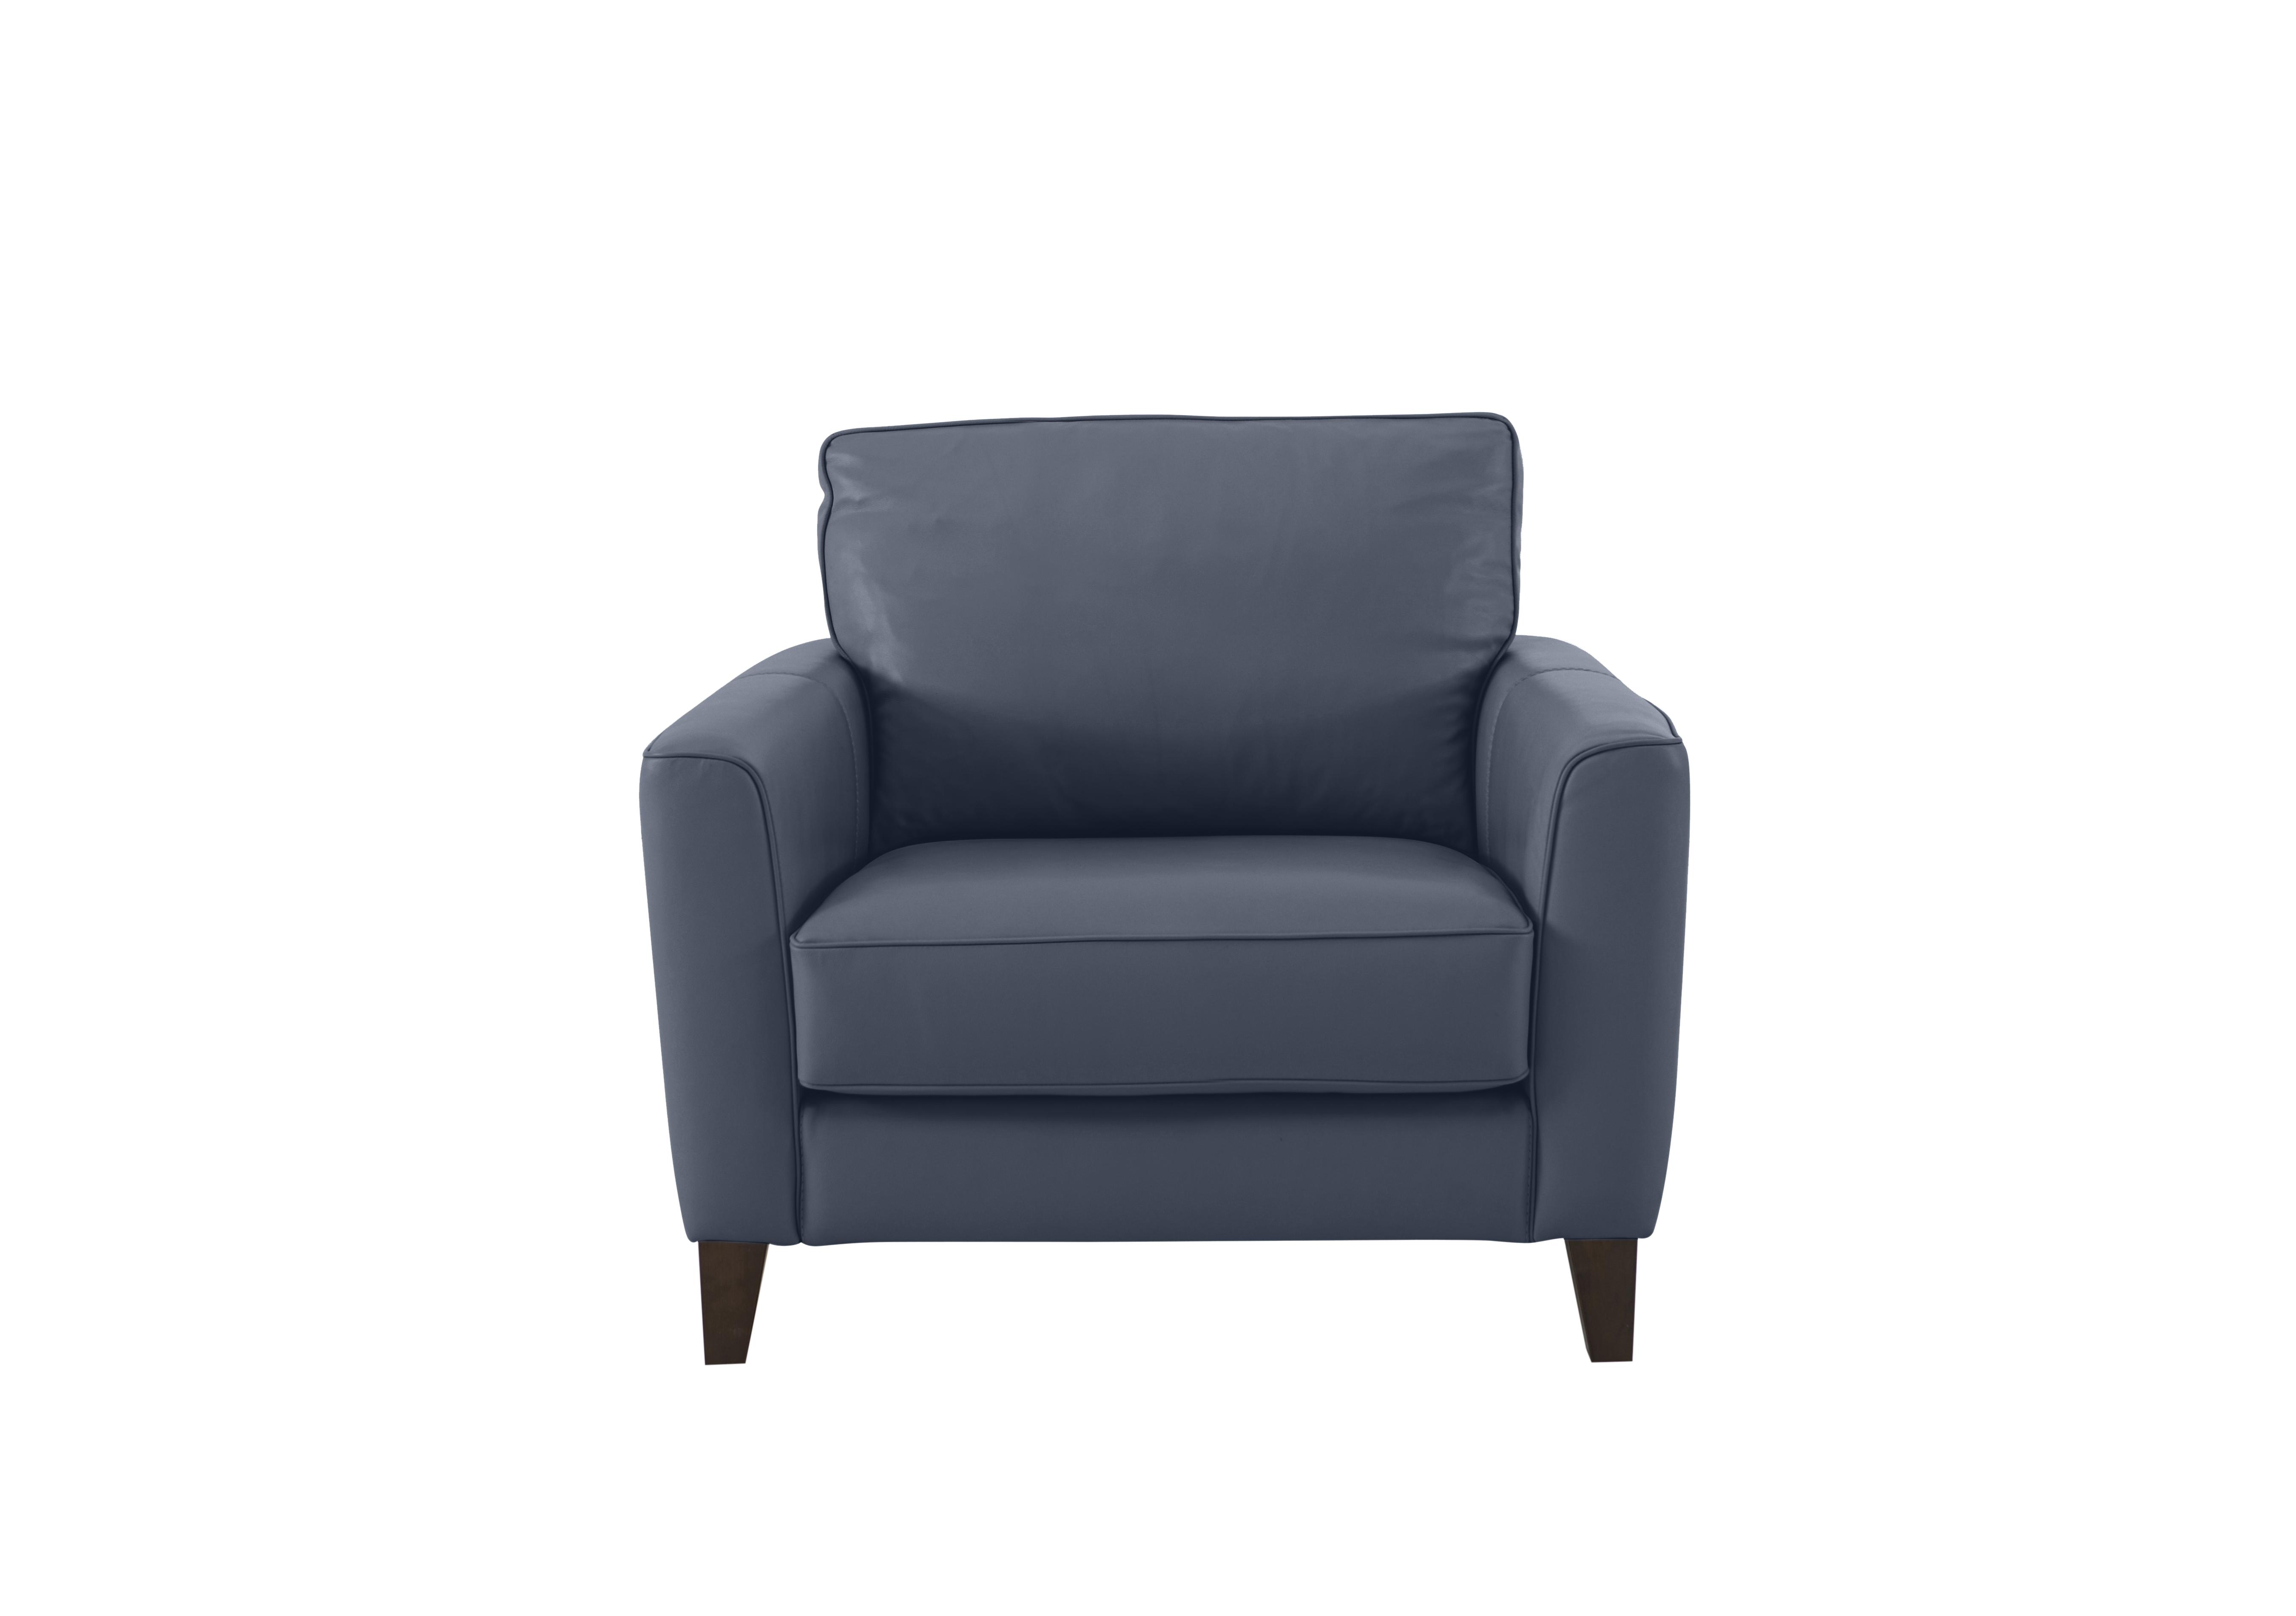 Brondby Leather Armchair in Bv-313e Ocean Blue on Furniture Village